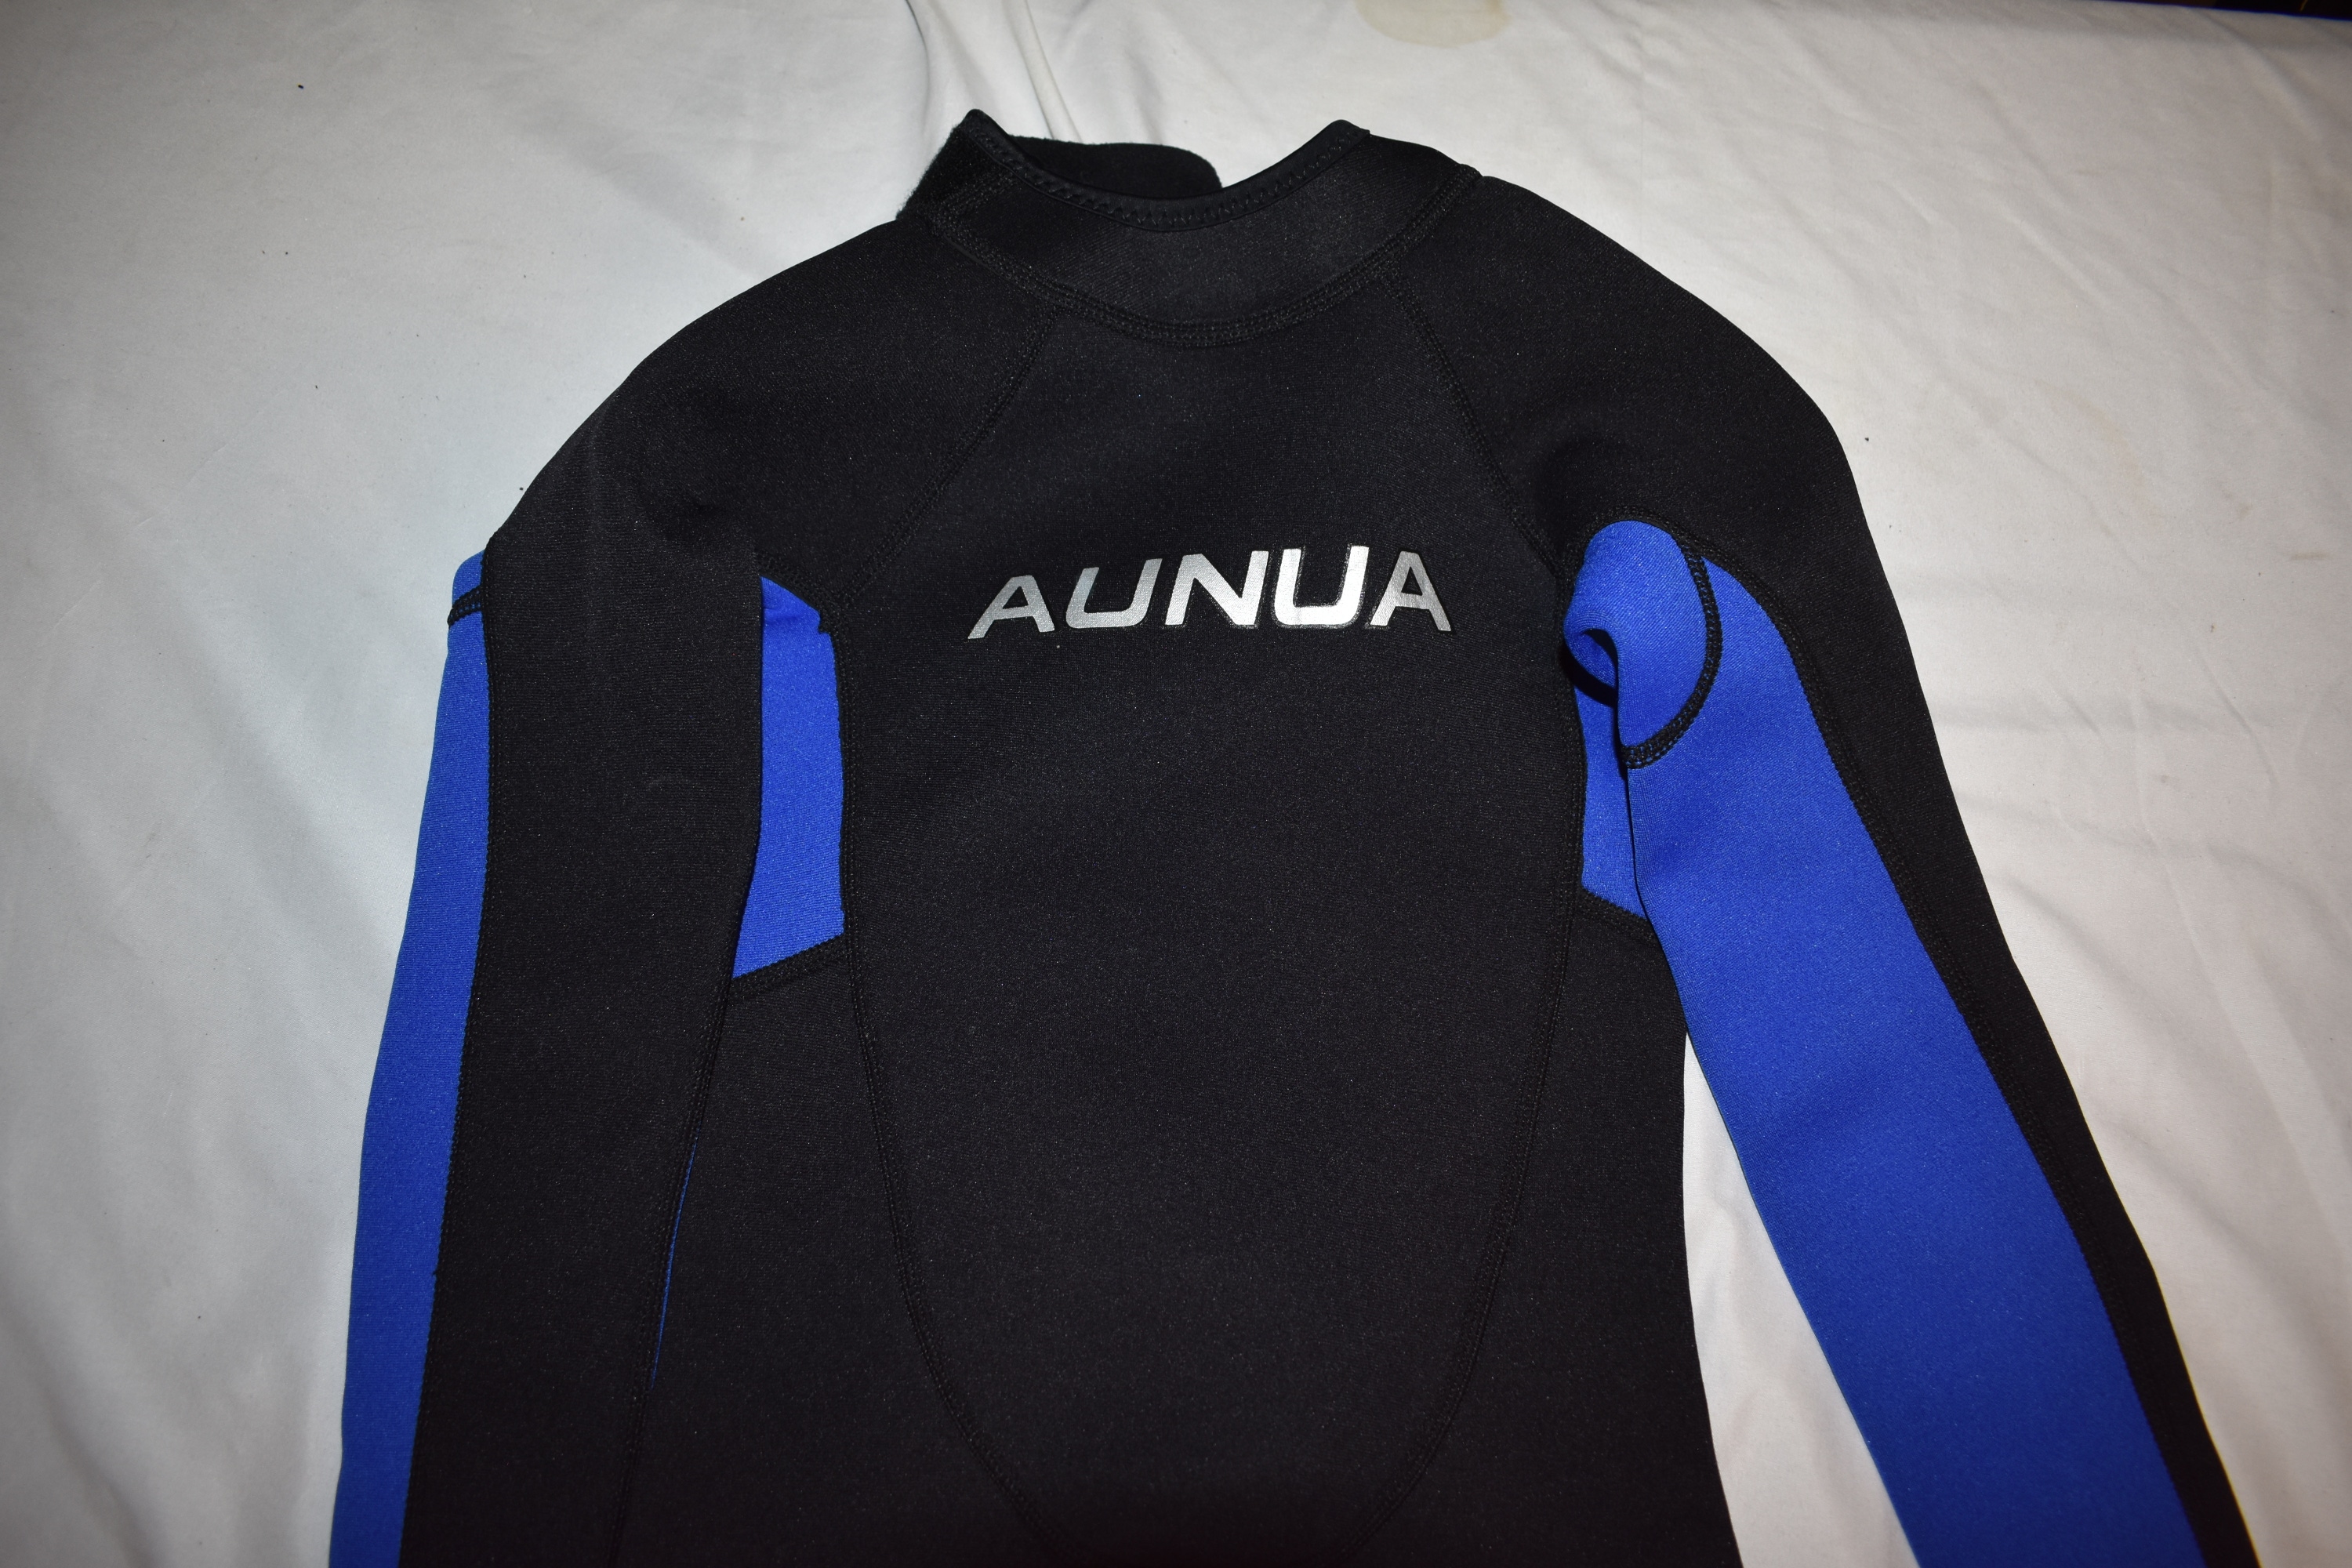 Auna Full Wetsuit, Black/Blue, Size 8 - Great Condition!